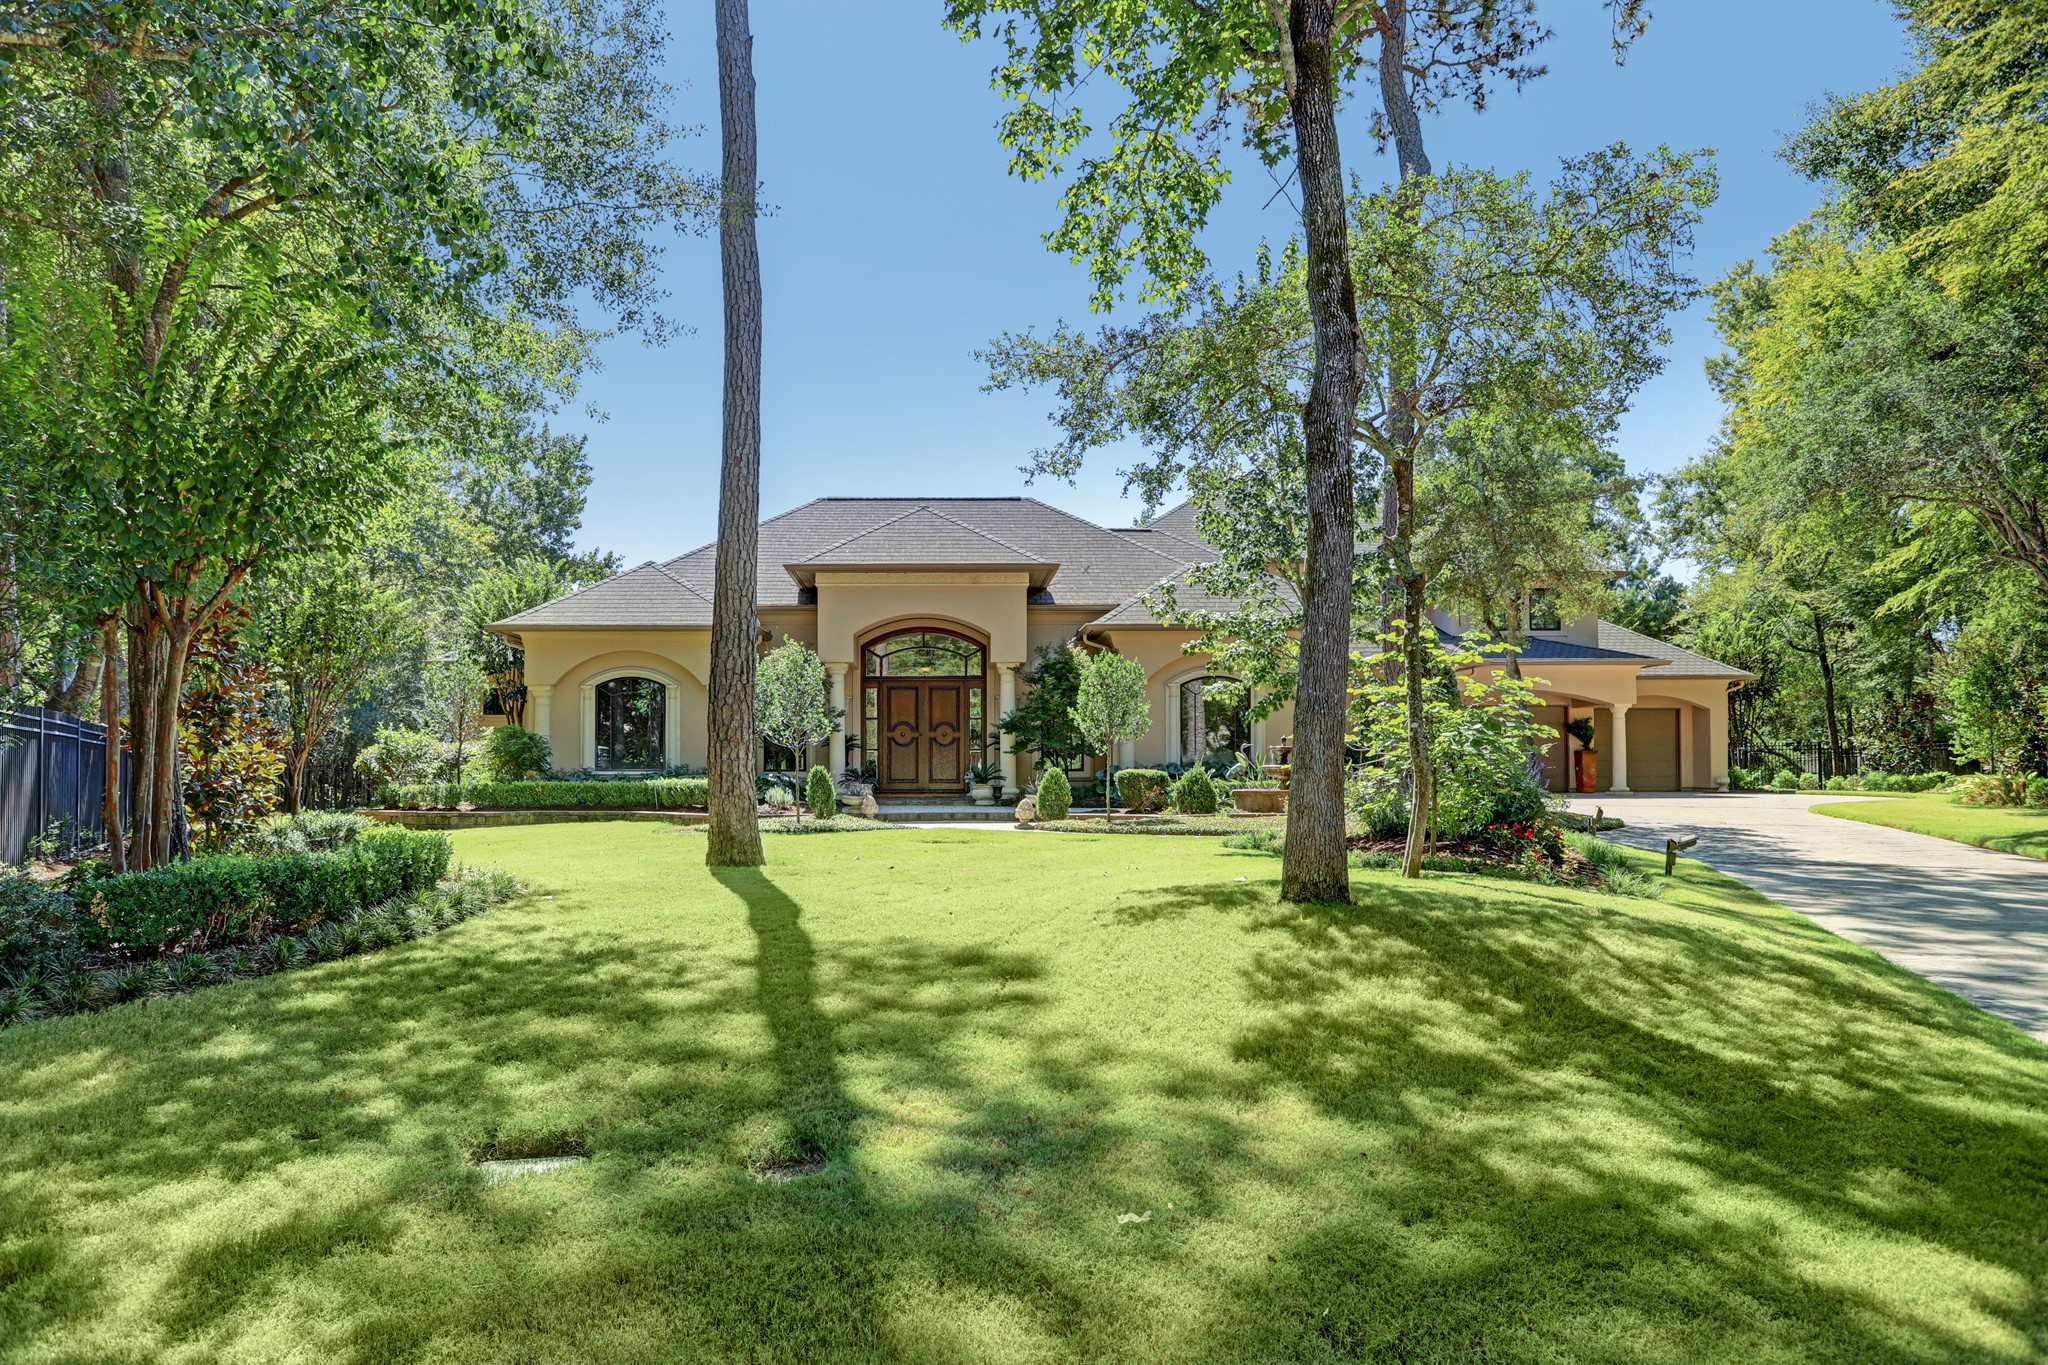 WELCOME TO 7 WINSLOW WAY IN THE VILLAGE OF CARLTON WOODS - 4/4.5/3 - beautiful custom home built by Robin Rueby on 3/4+ wooded cul-de-sac lot in the heart of guard-gated Carlton Woods